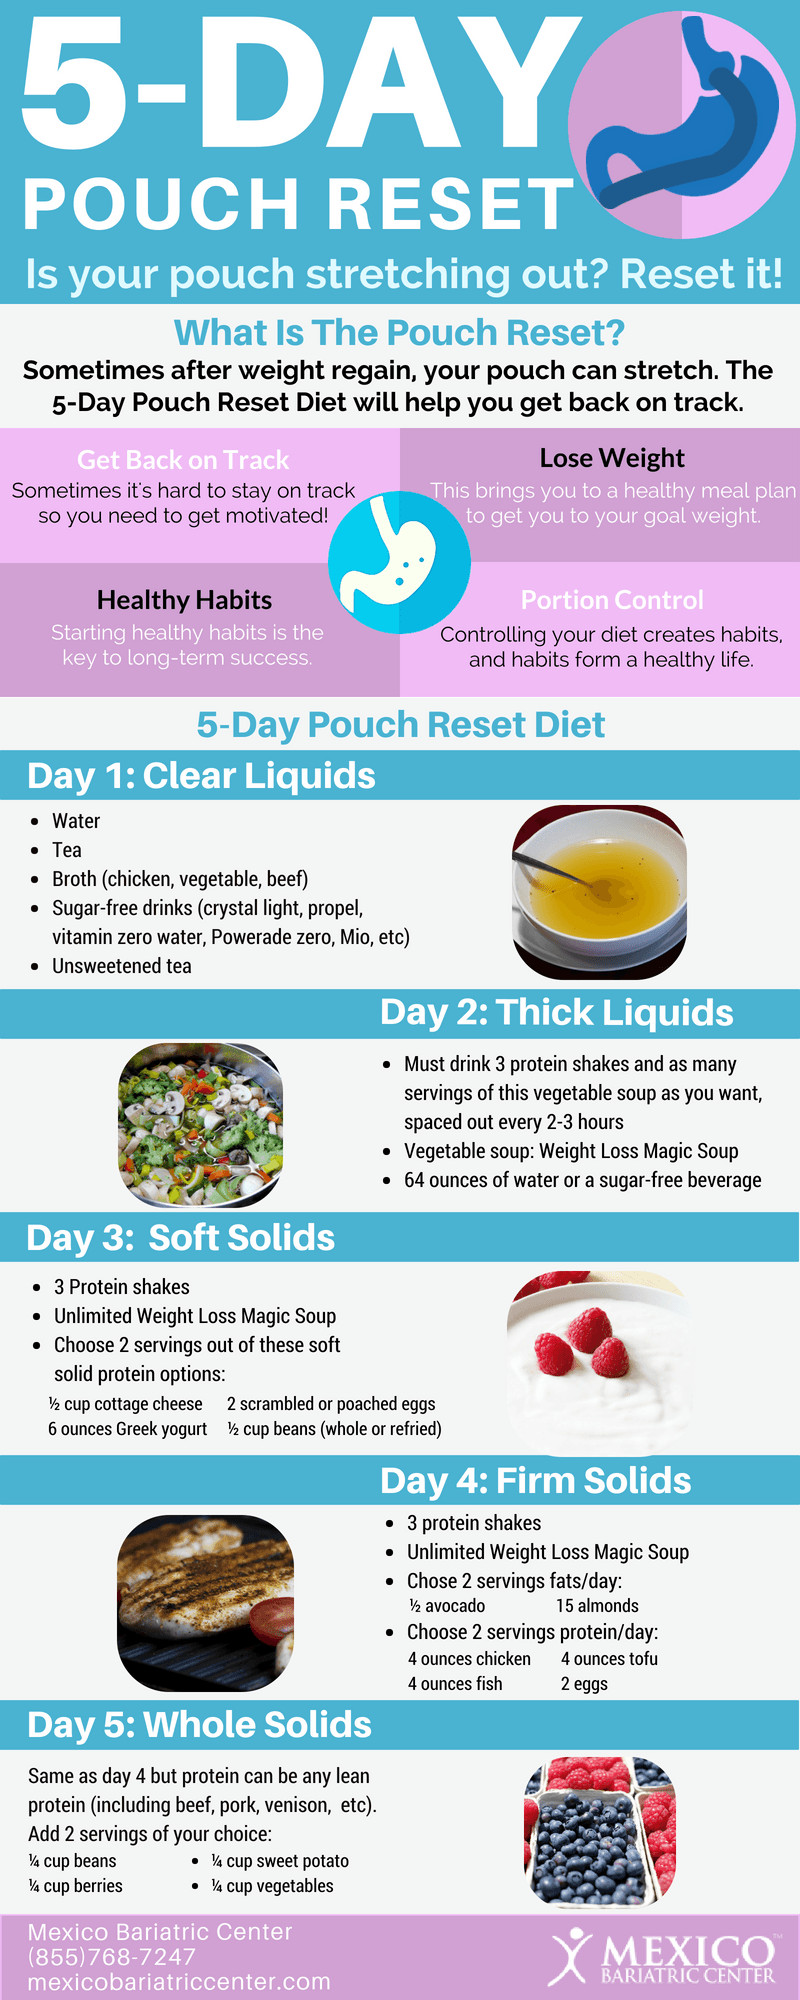 5 Day Pouch Reset Weight Loss Surgery
 5 Day Pouch Reset Lose Weight After Weight Gain